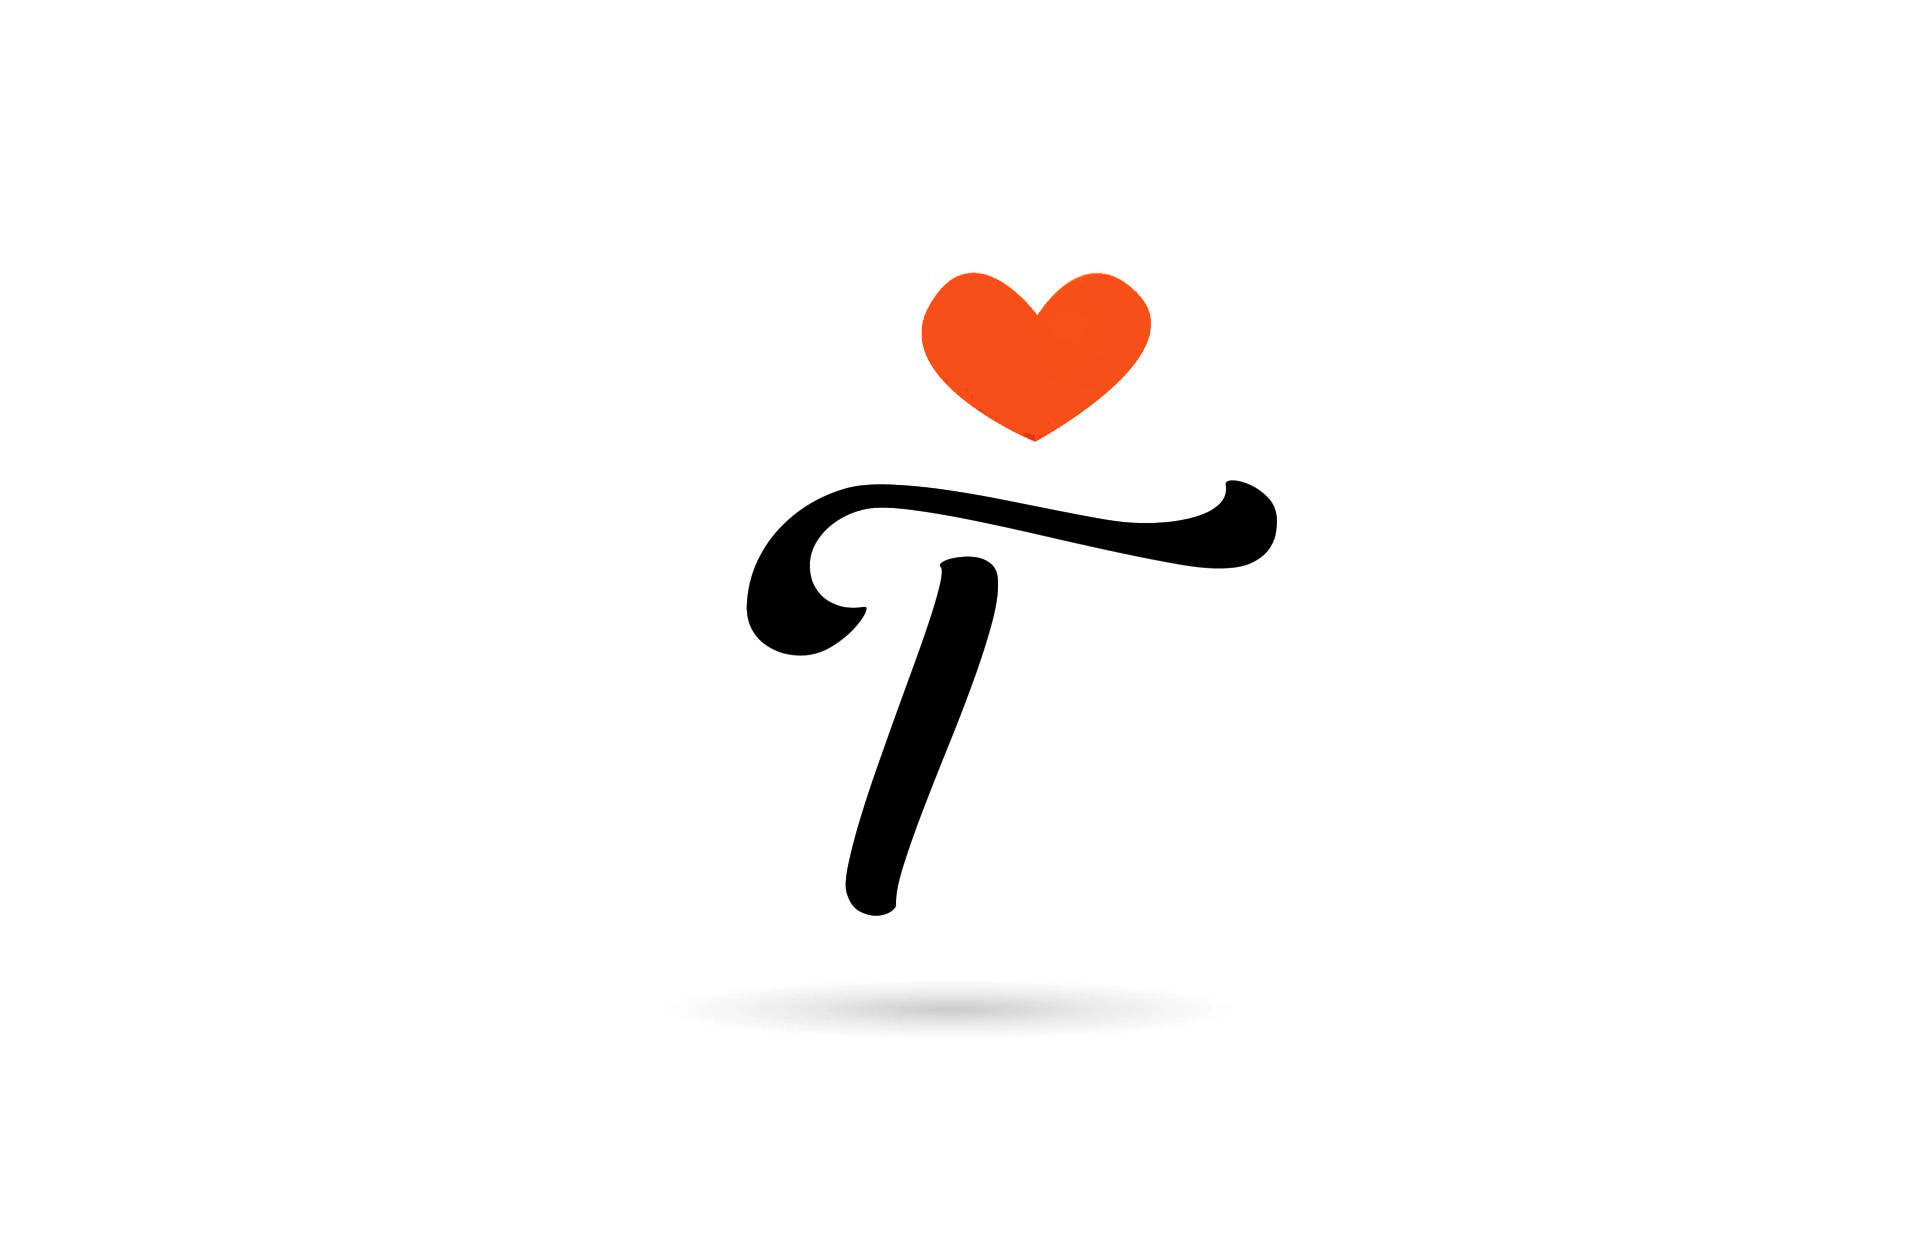 Free Letter T Wallpaper Downloads, [100+] Letter T Wallpapers for FREE |  